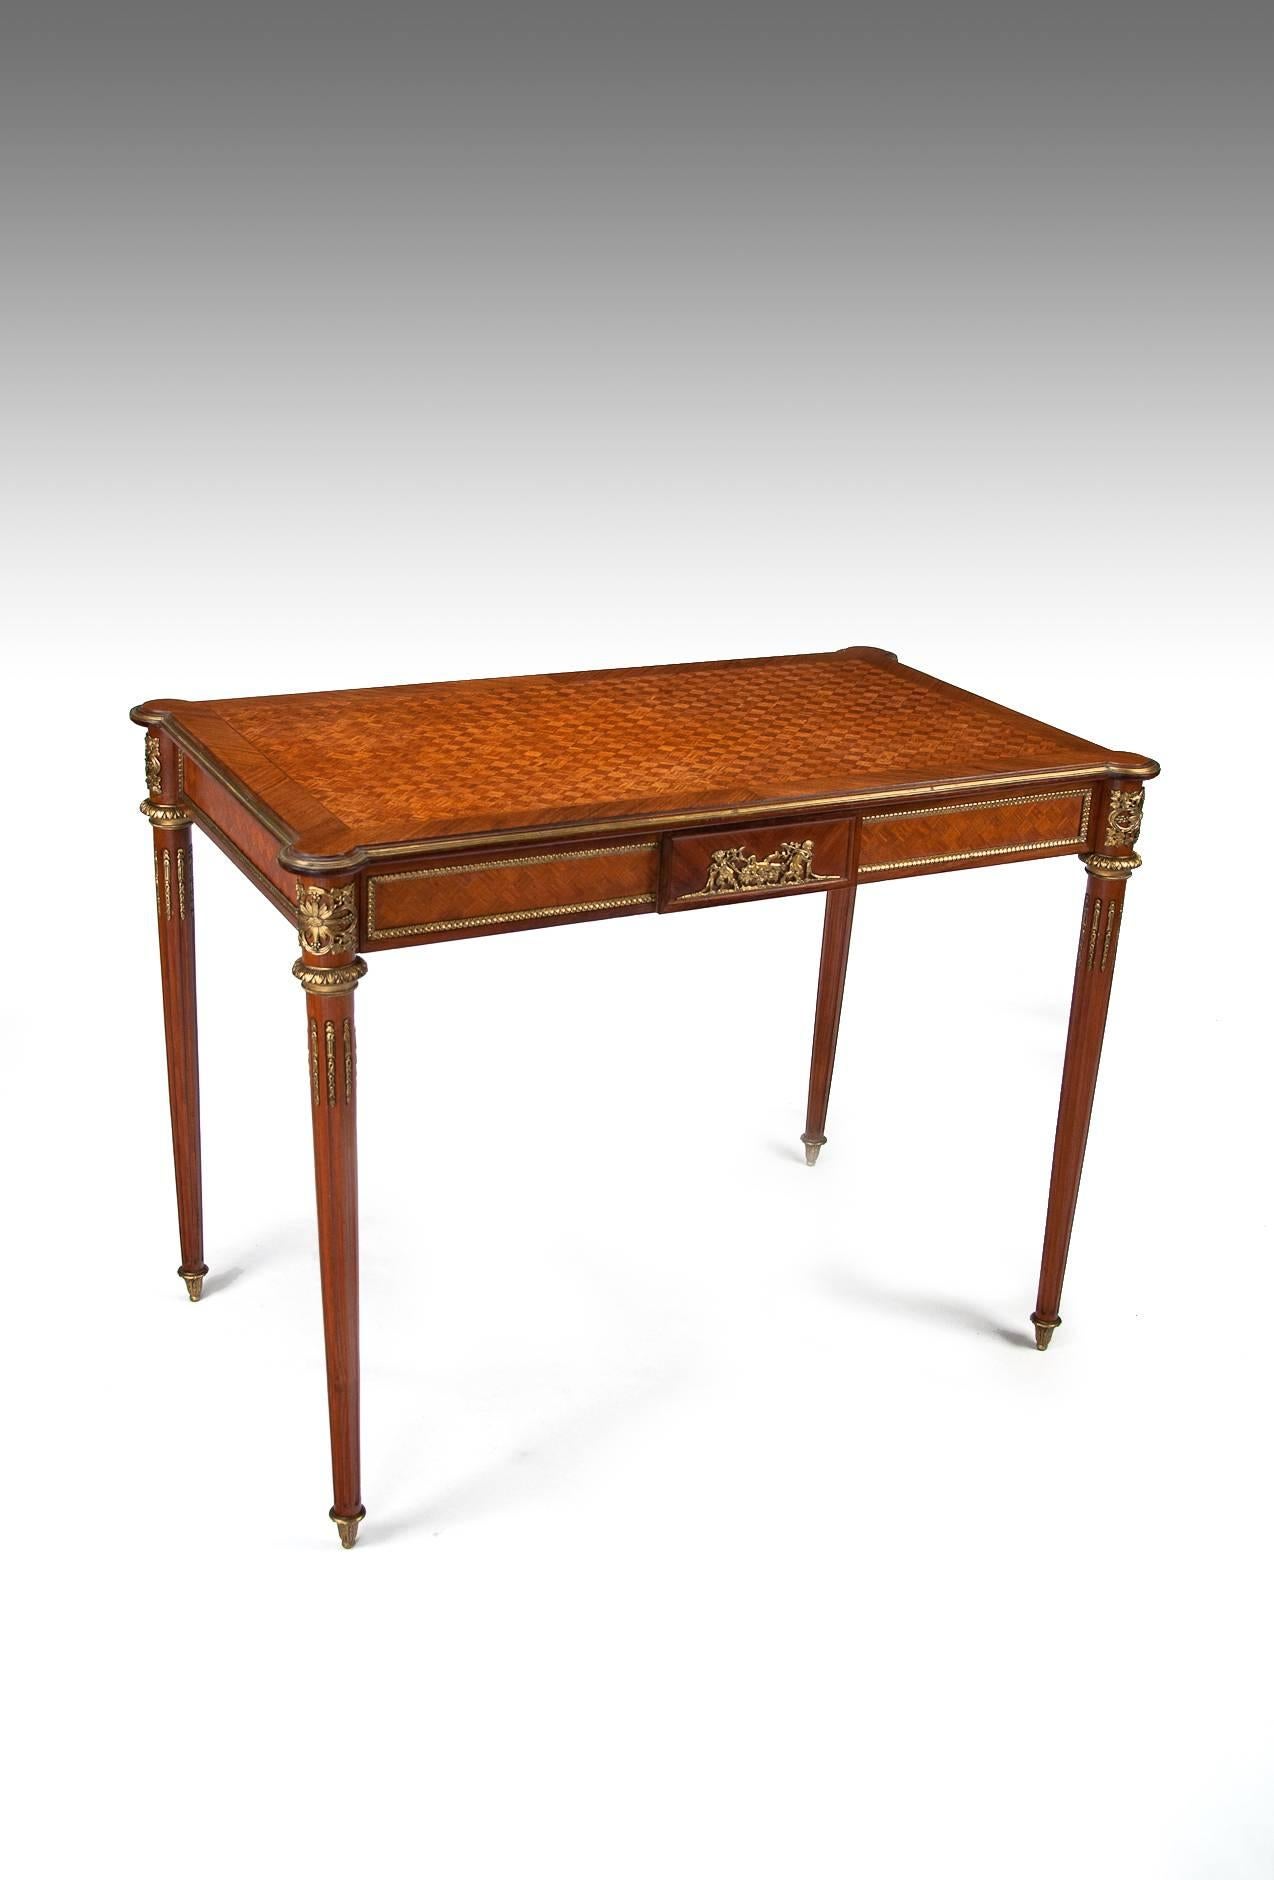 A very fine French late 19th- early20th-century Louis XVI style kingwood parquetry and ormolu-mounted ladies writing table.  Circa 1890-1900.

The cubed parquetry inlaid rectangular top with outset circular corners having an inlaid and crossbanded